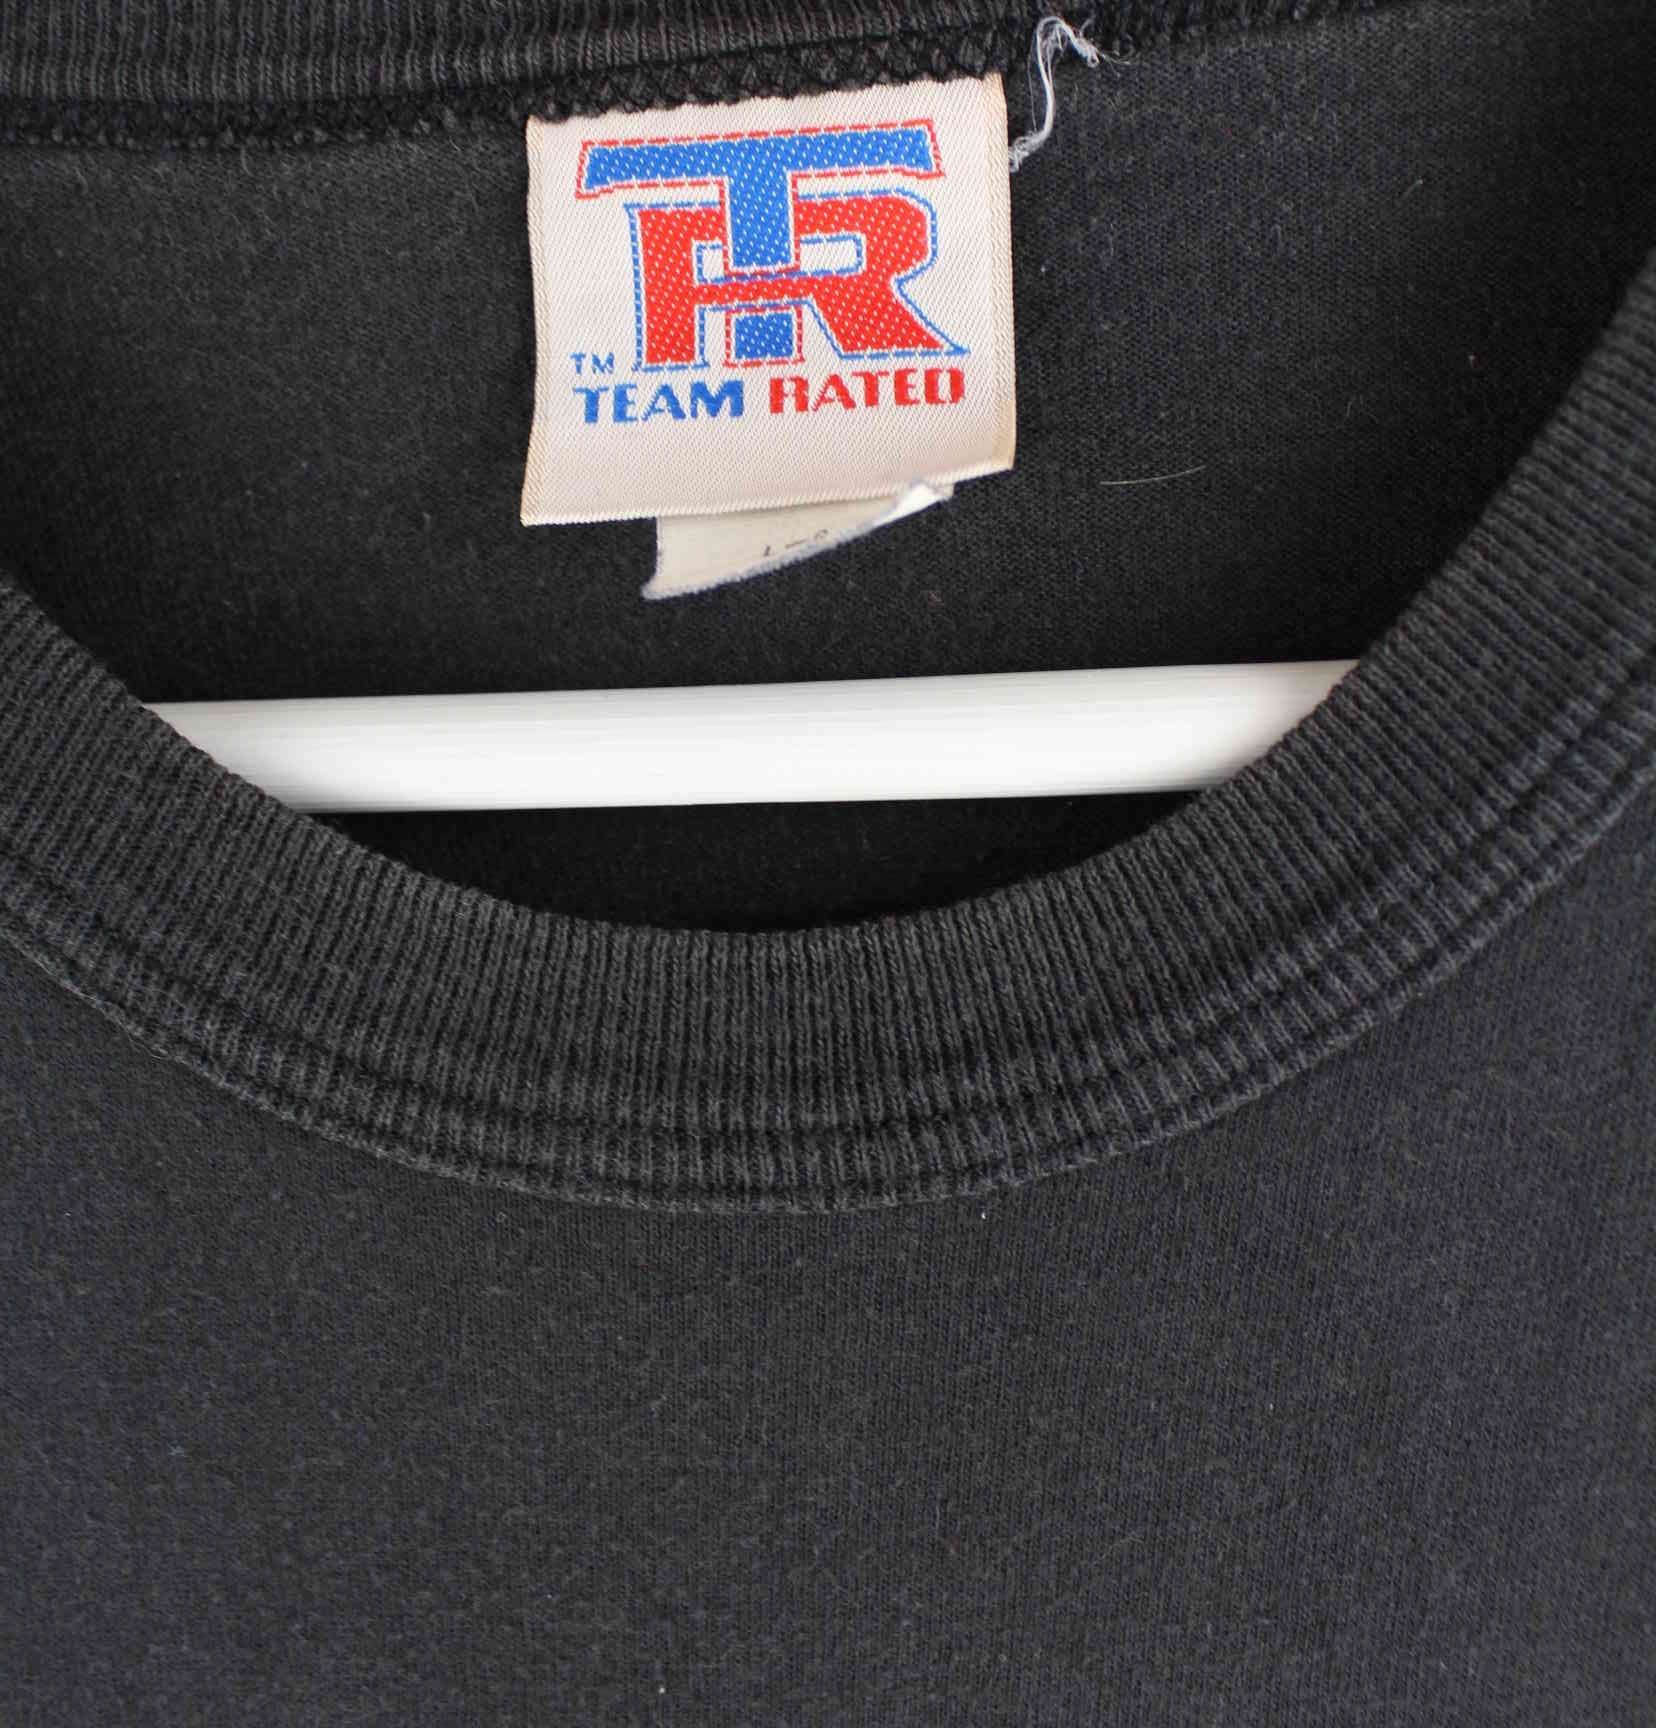 Team Rated 1996 Steelers Print T-Shirt Schwarz L (detail image 3)